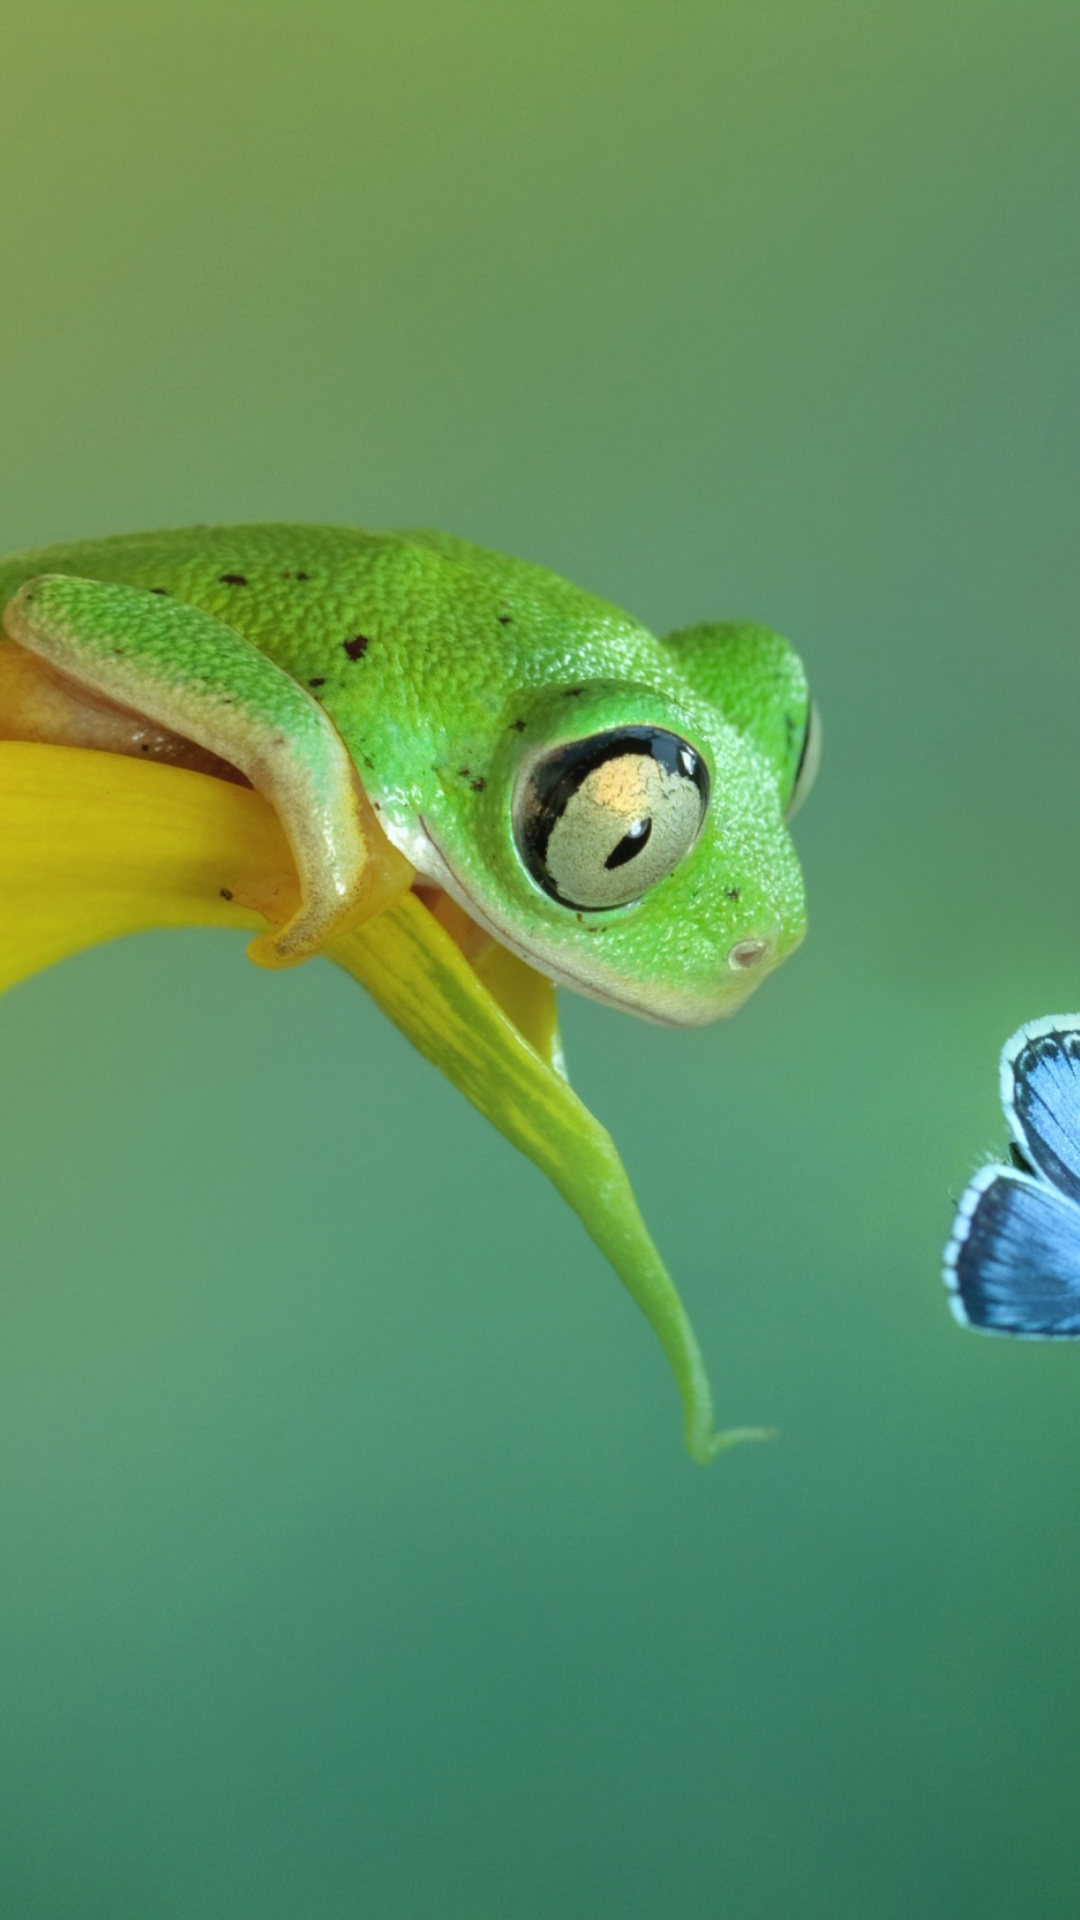 Frog and butterfly screenshot #1 1080x1920